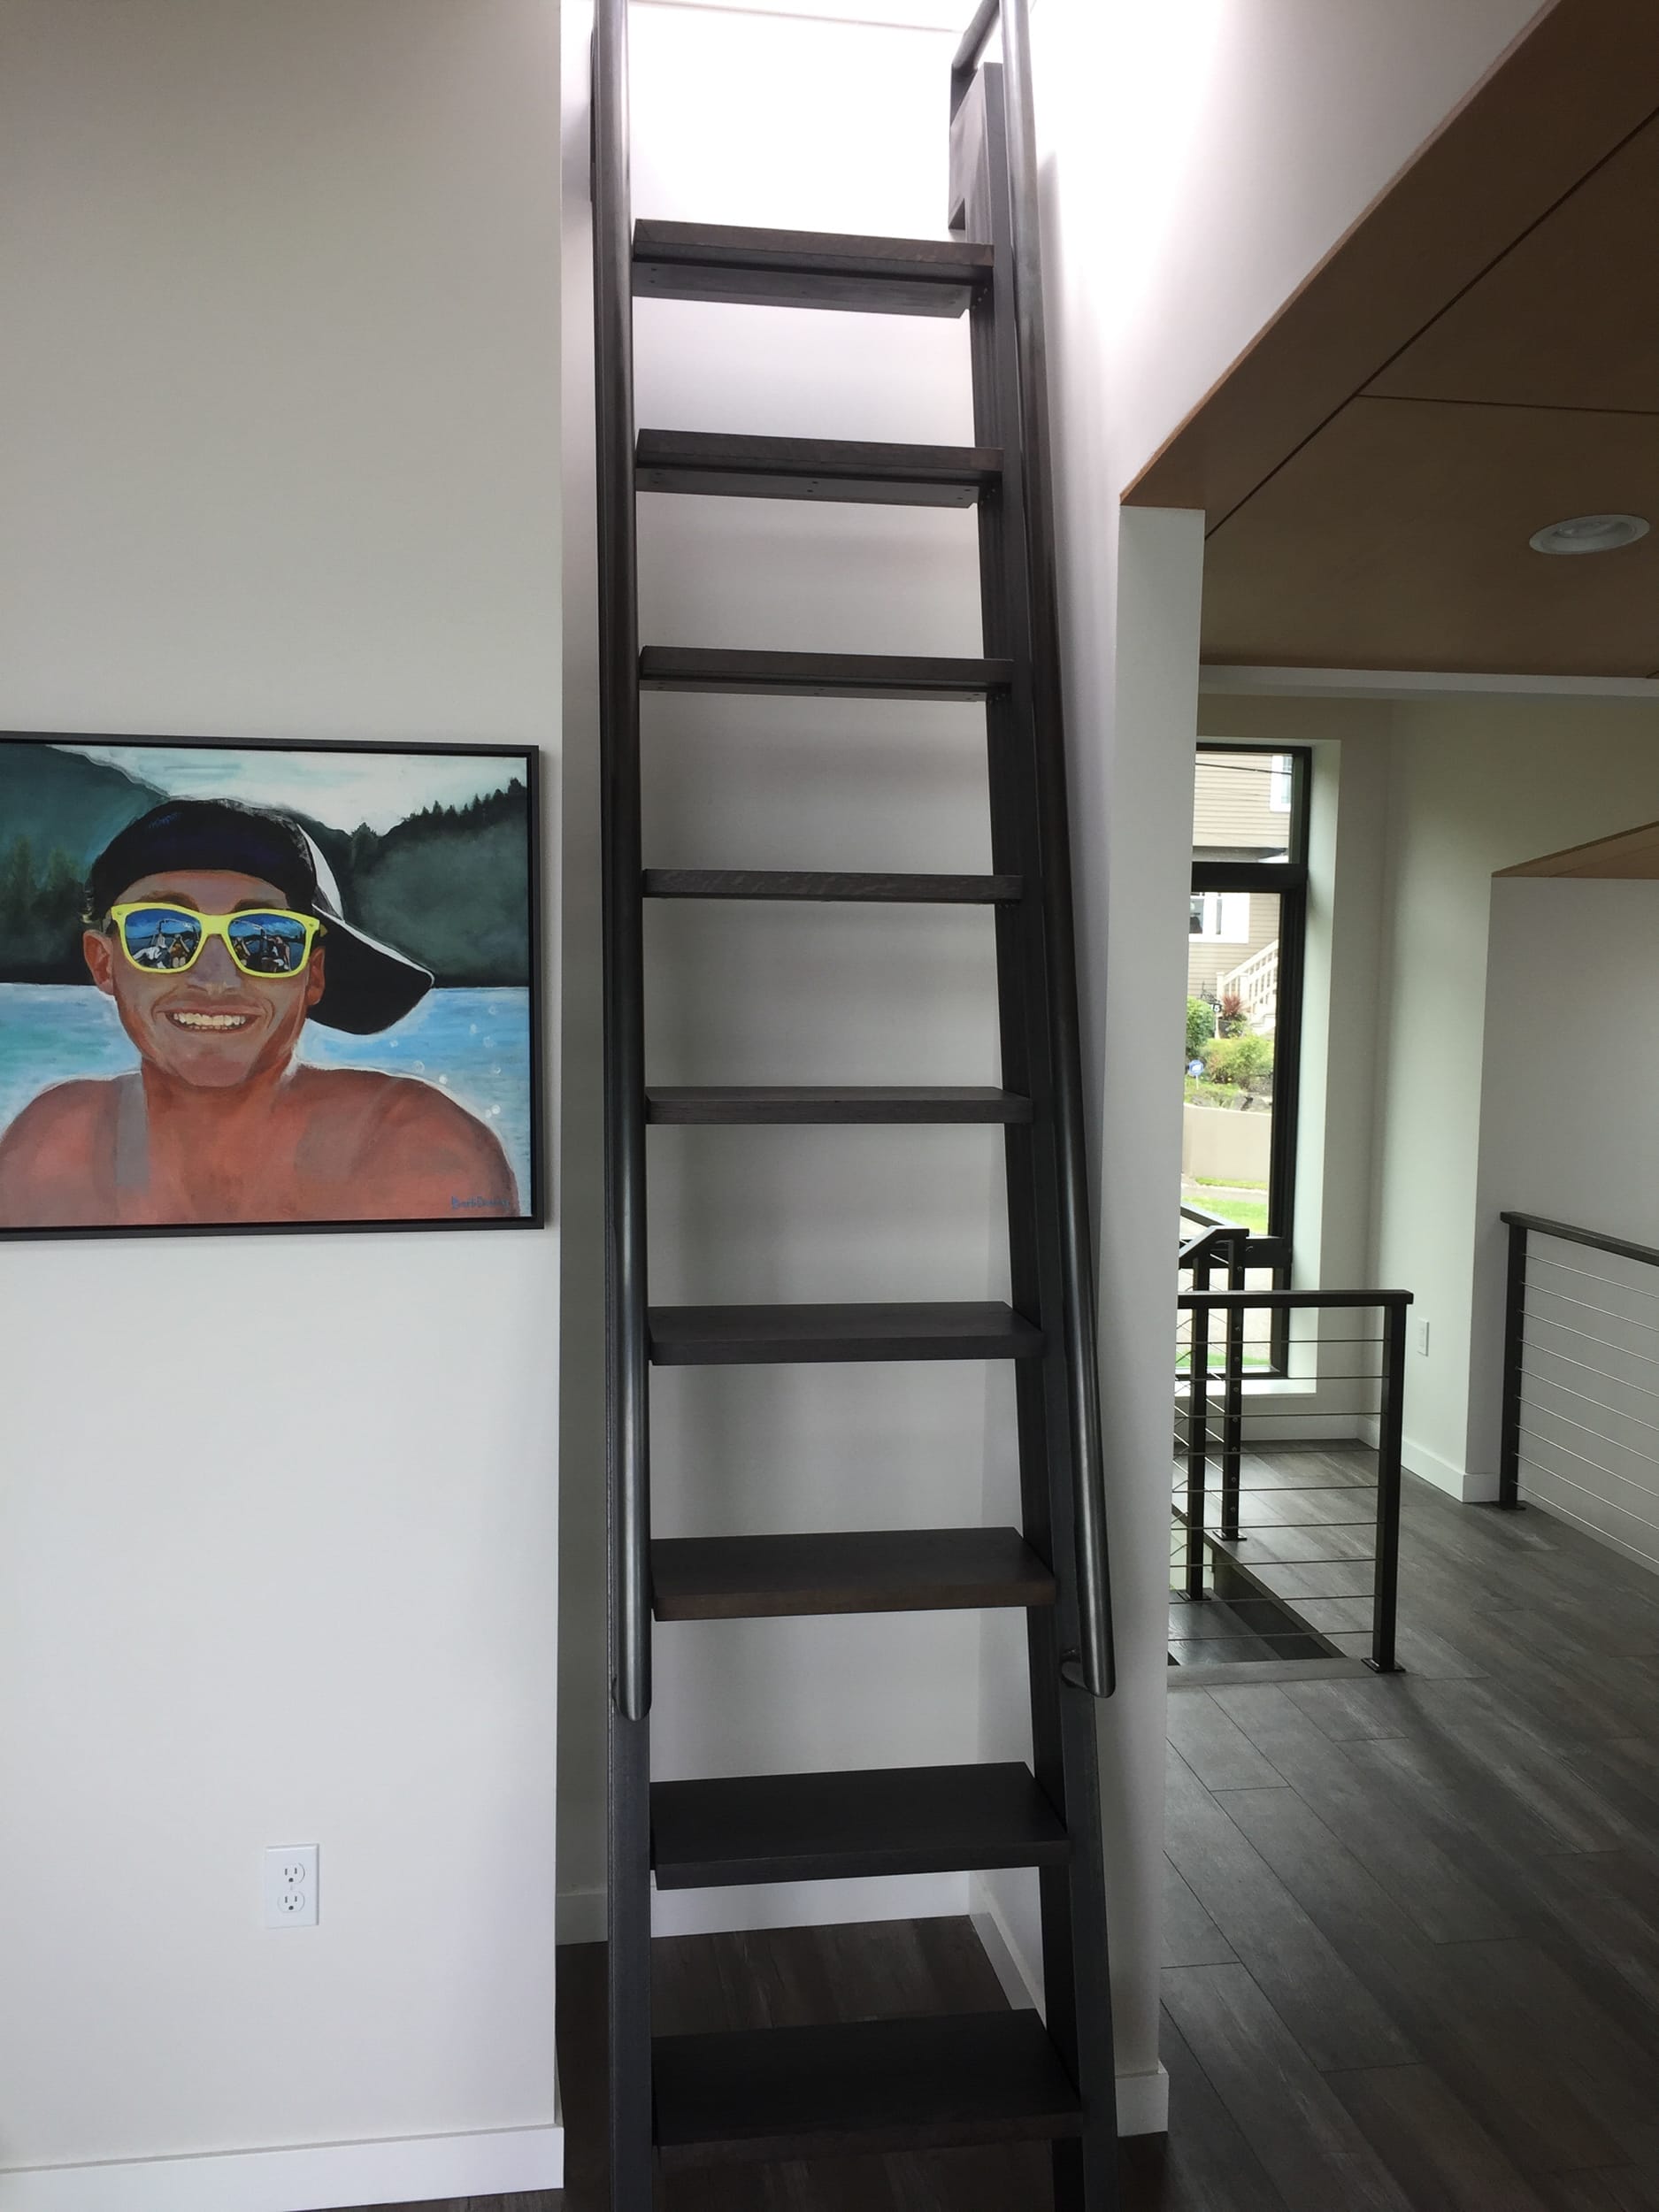 A ladder leading up to a painting of a man in sunglasses.